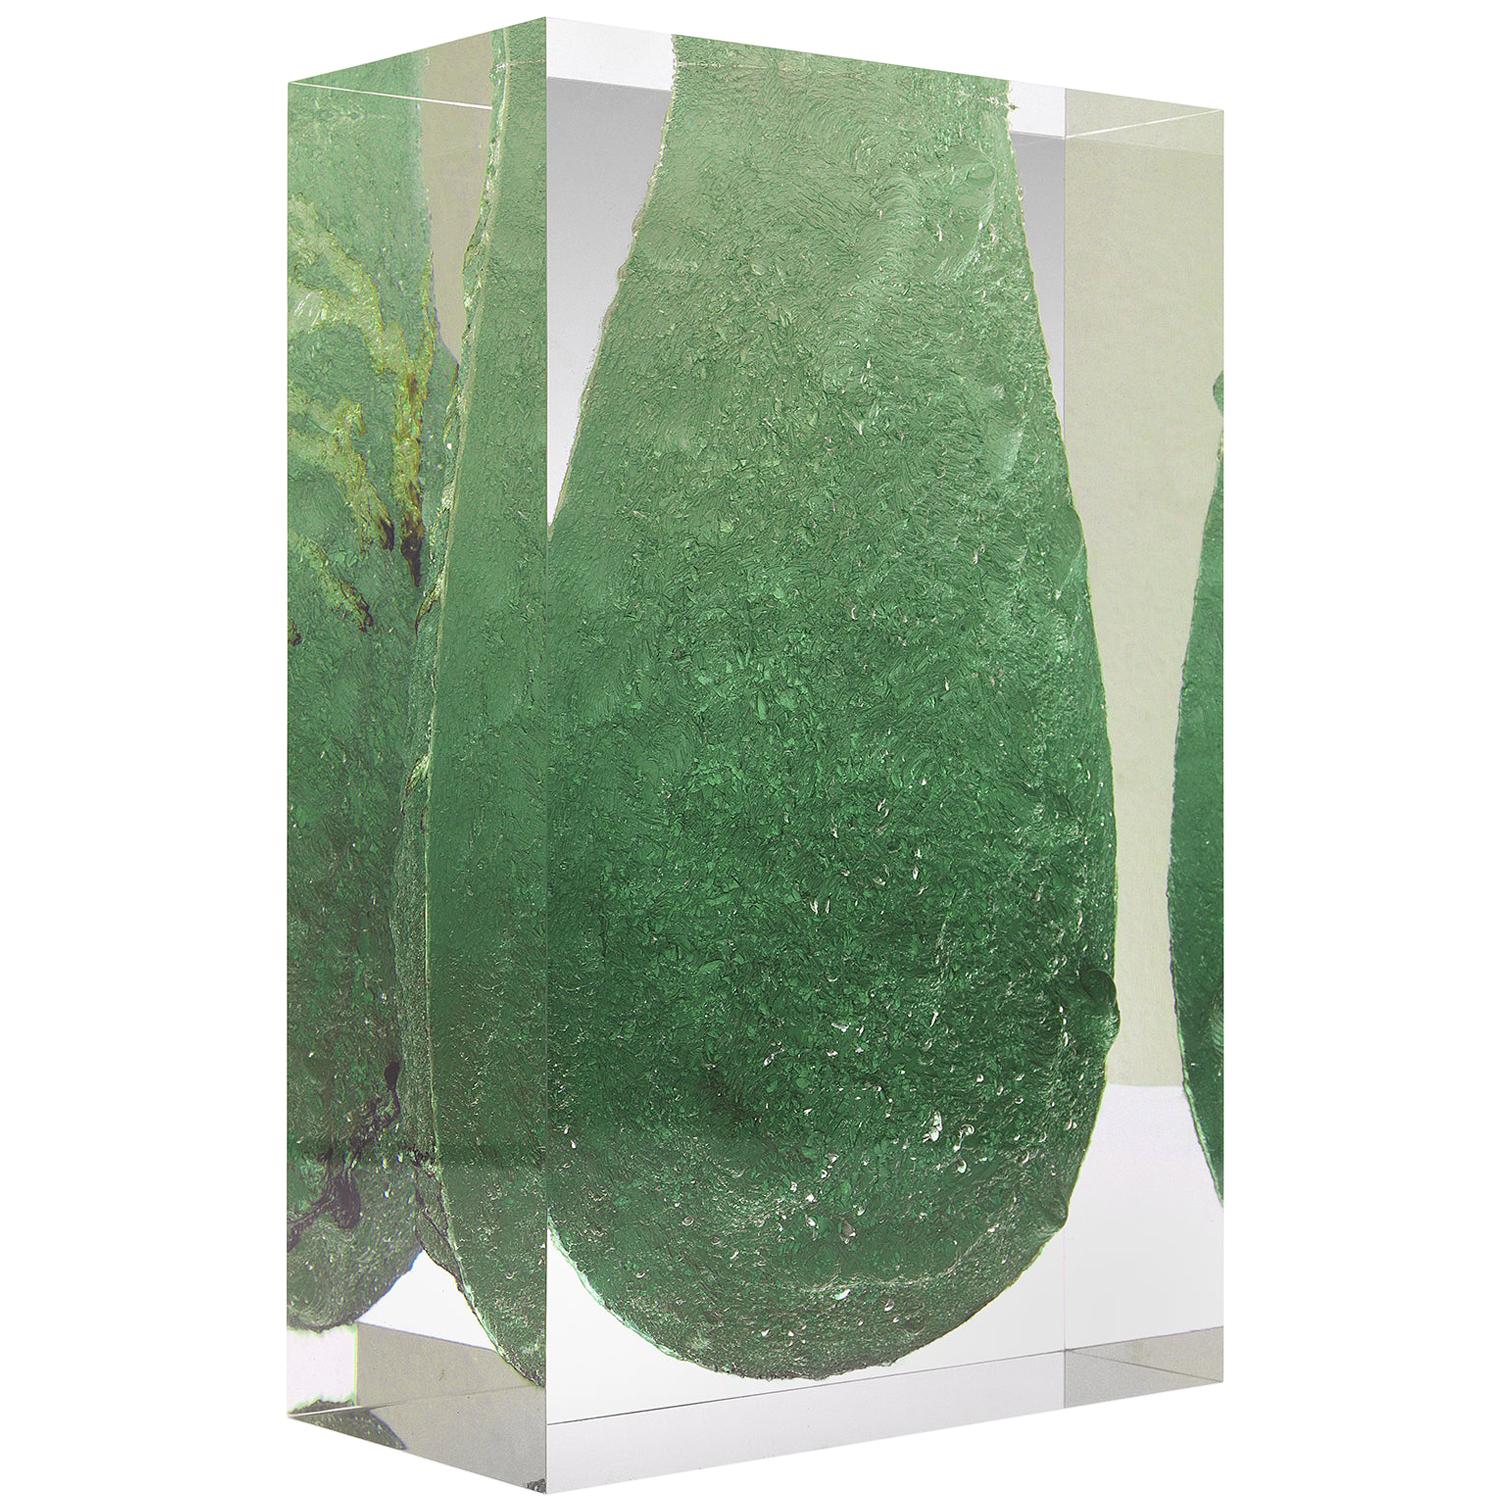 For Sale: Green (Emerald) 21st Century Glacoja Vase in hand-sculpted methacrylate by Analogia Project